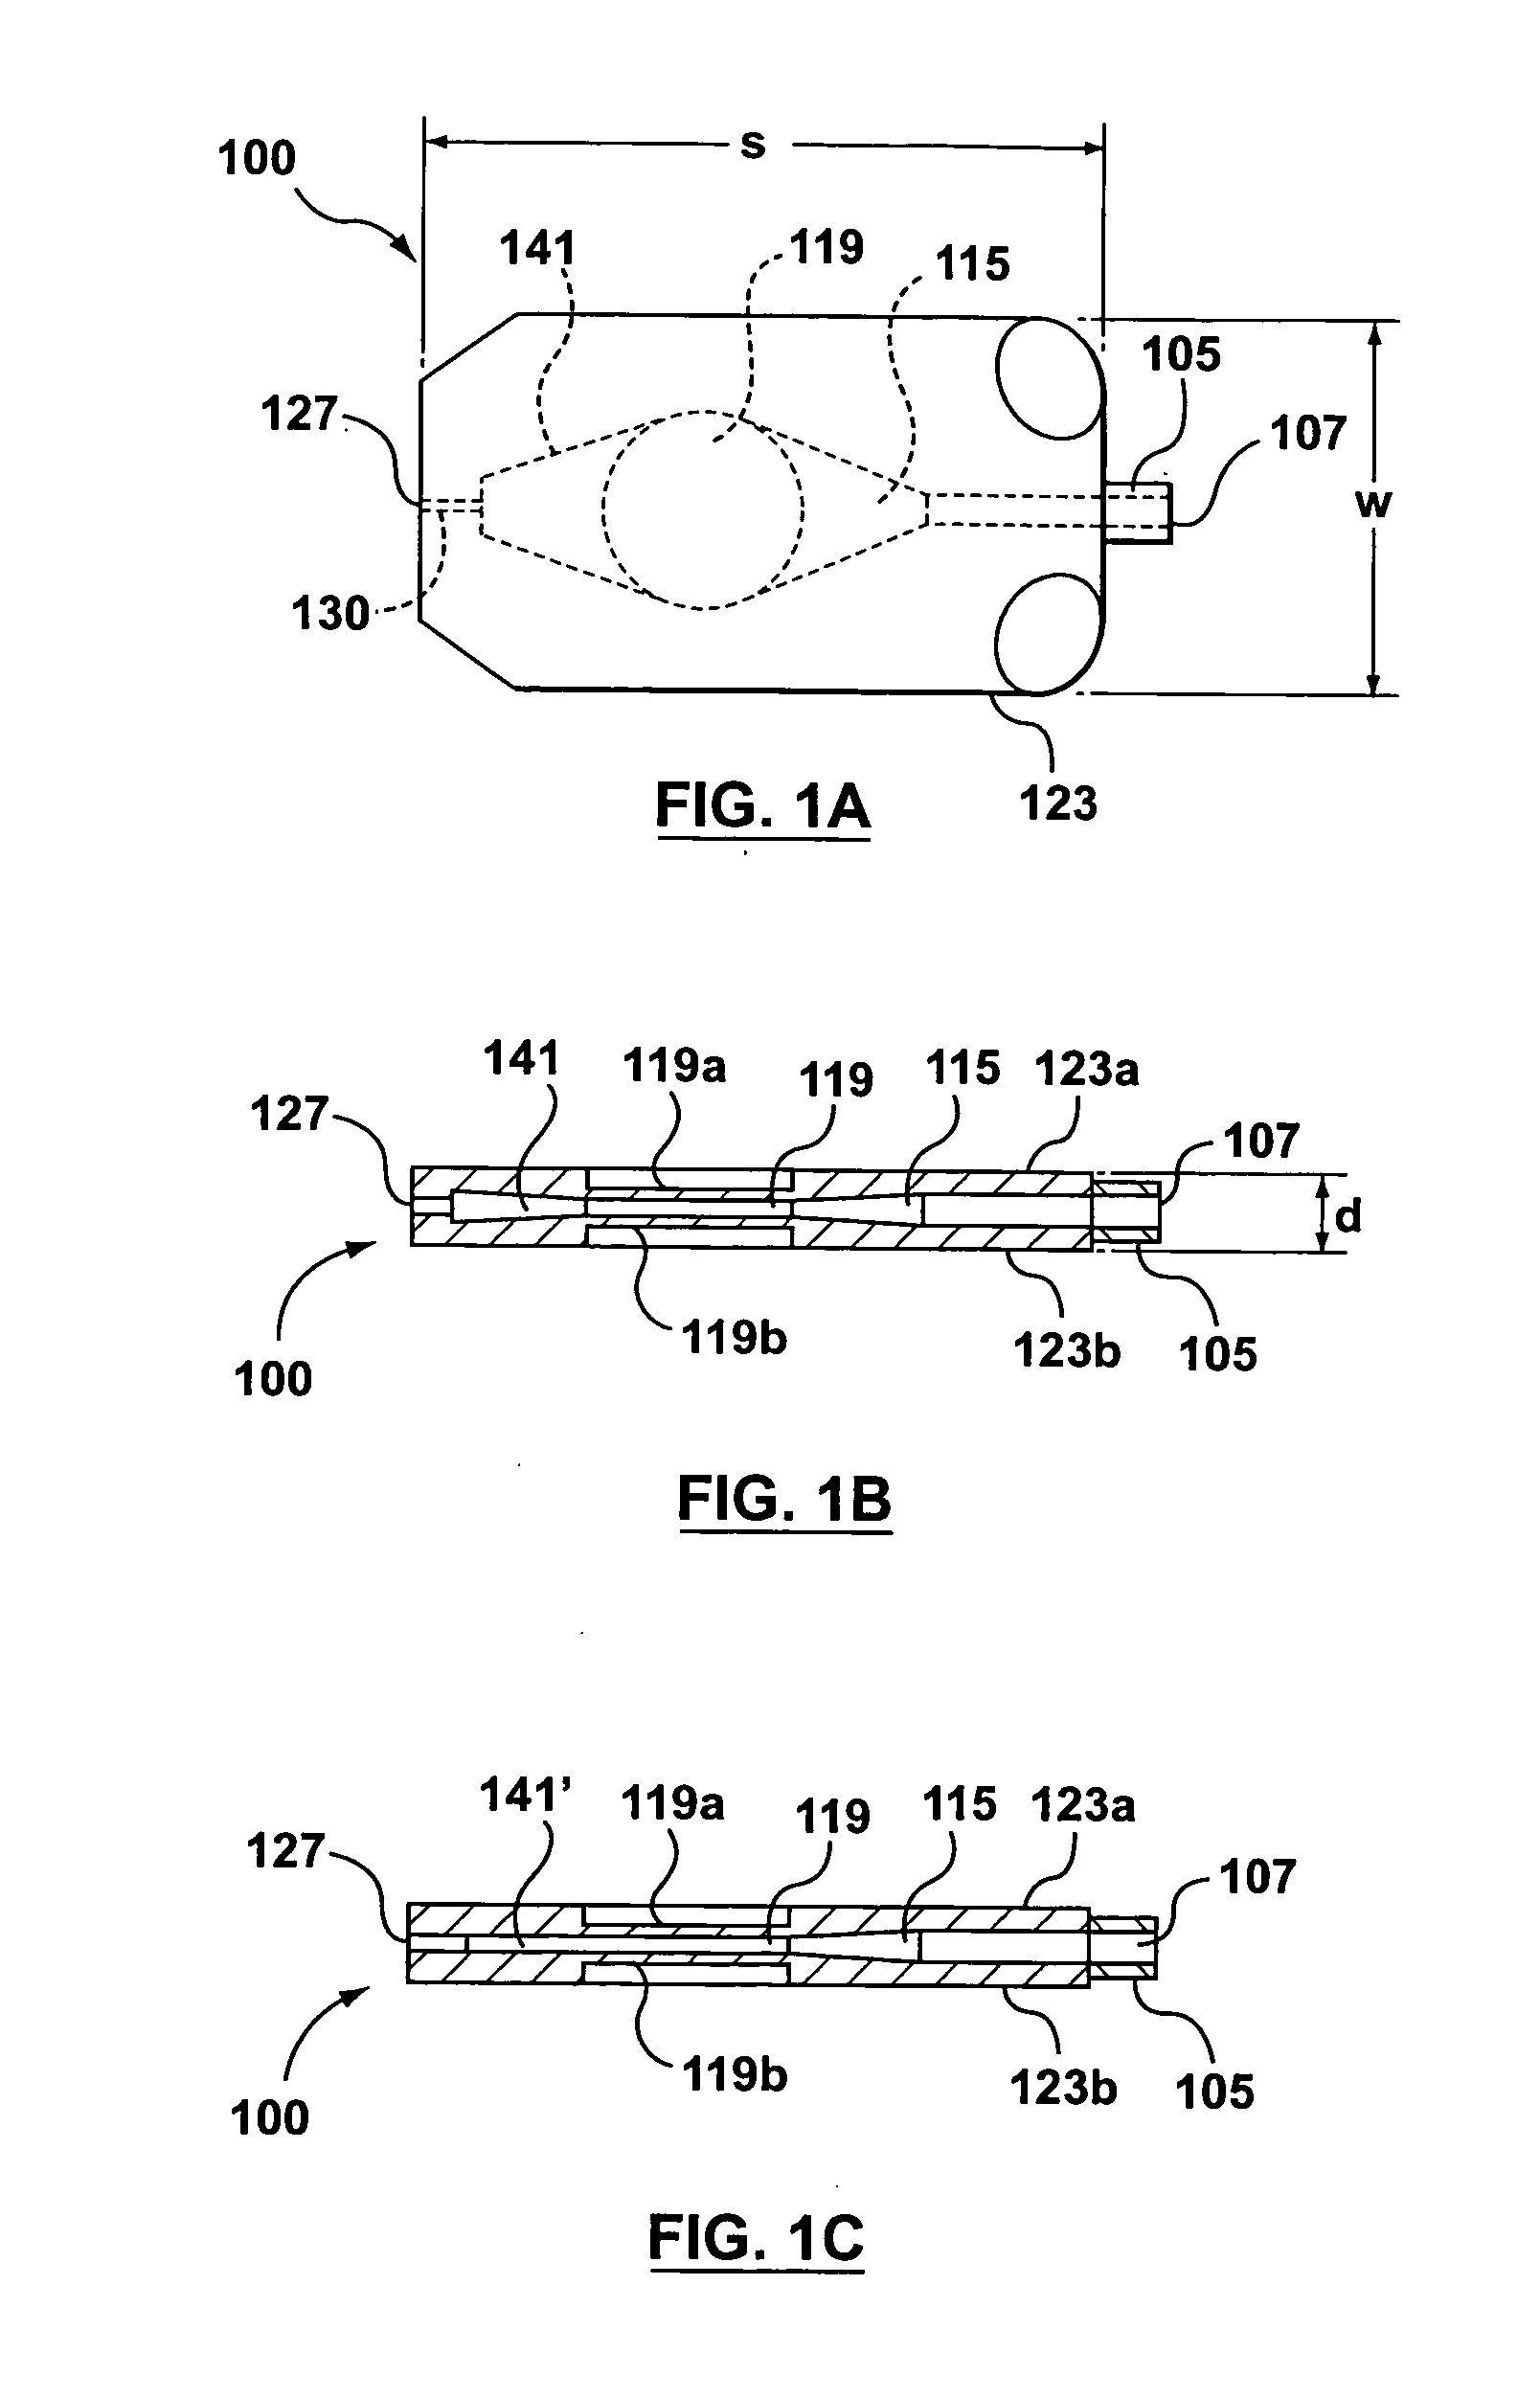 Blood collection and measurement apparatus